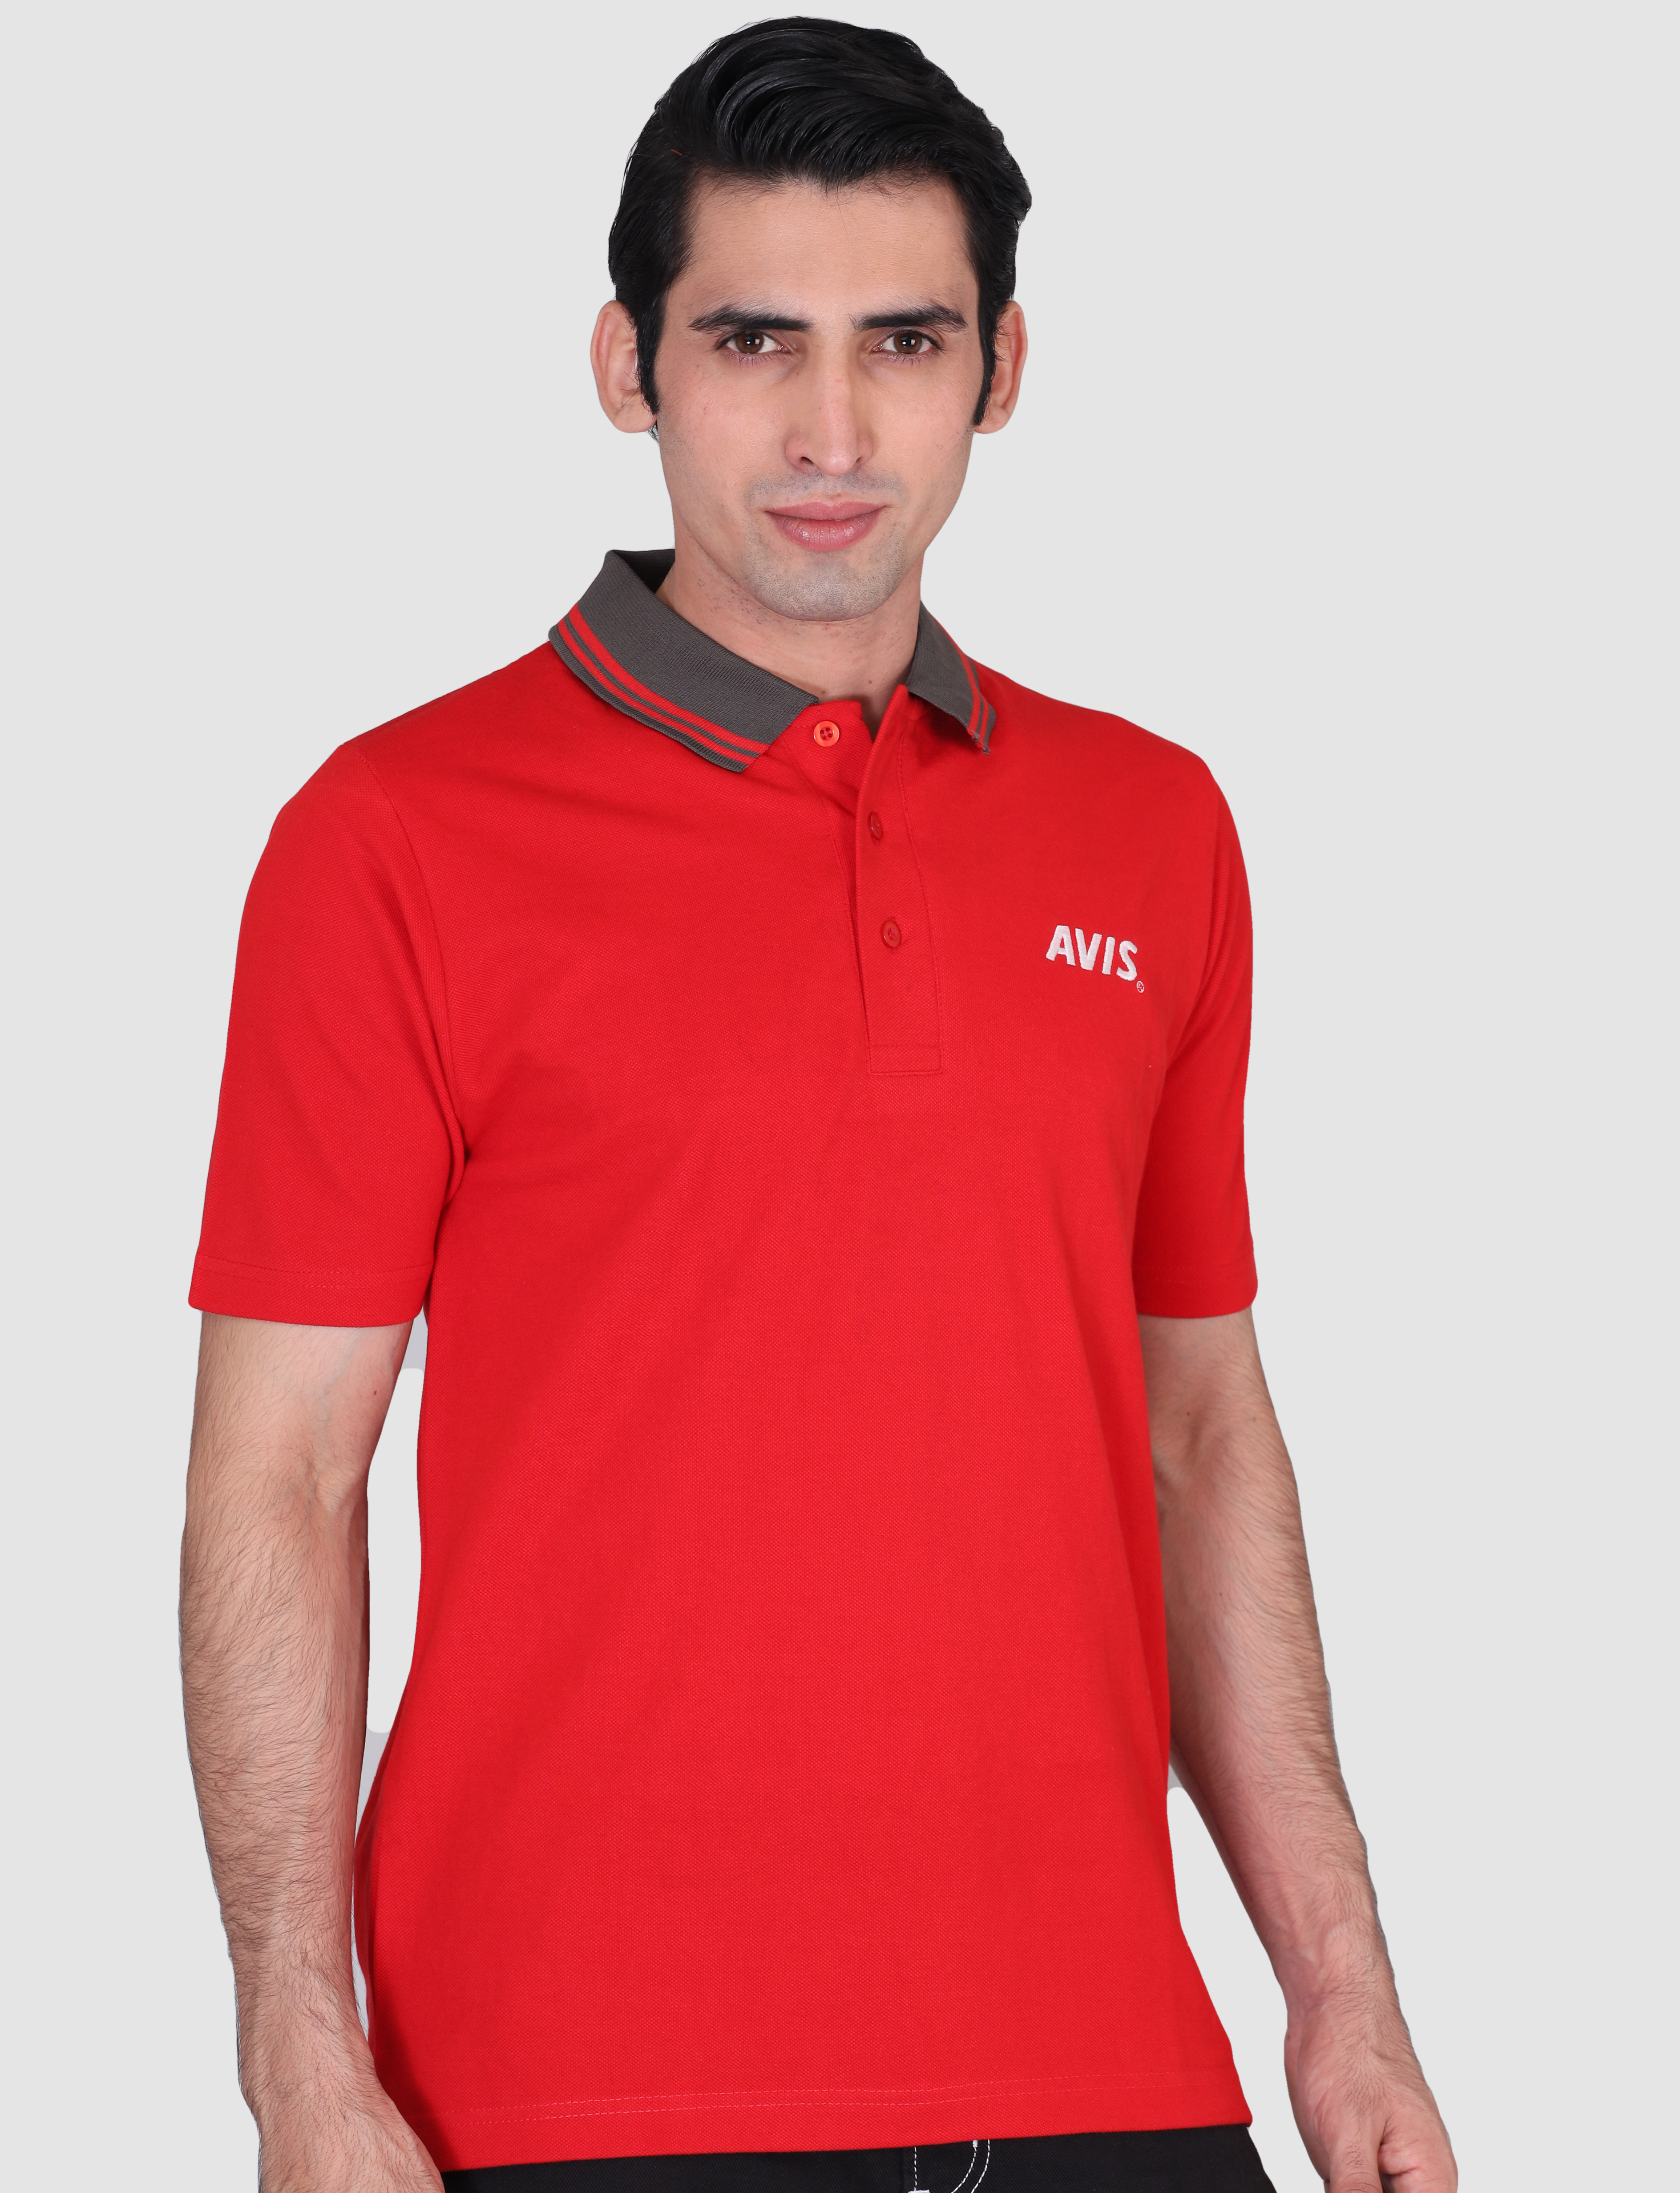 Avis grey collar with red tipping promotional polo t-shirts supplier 